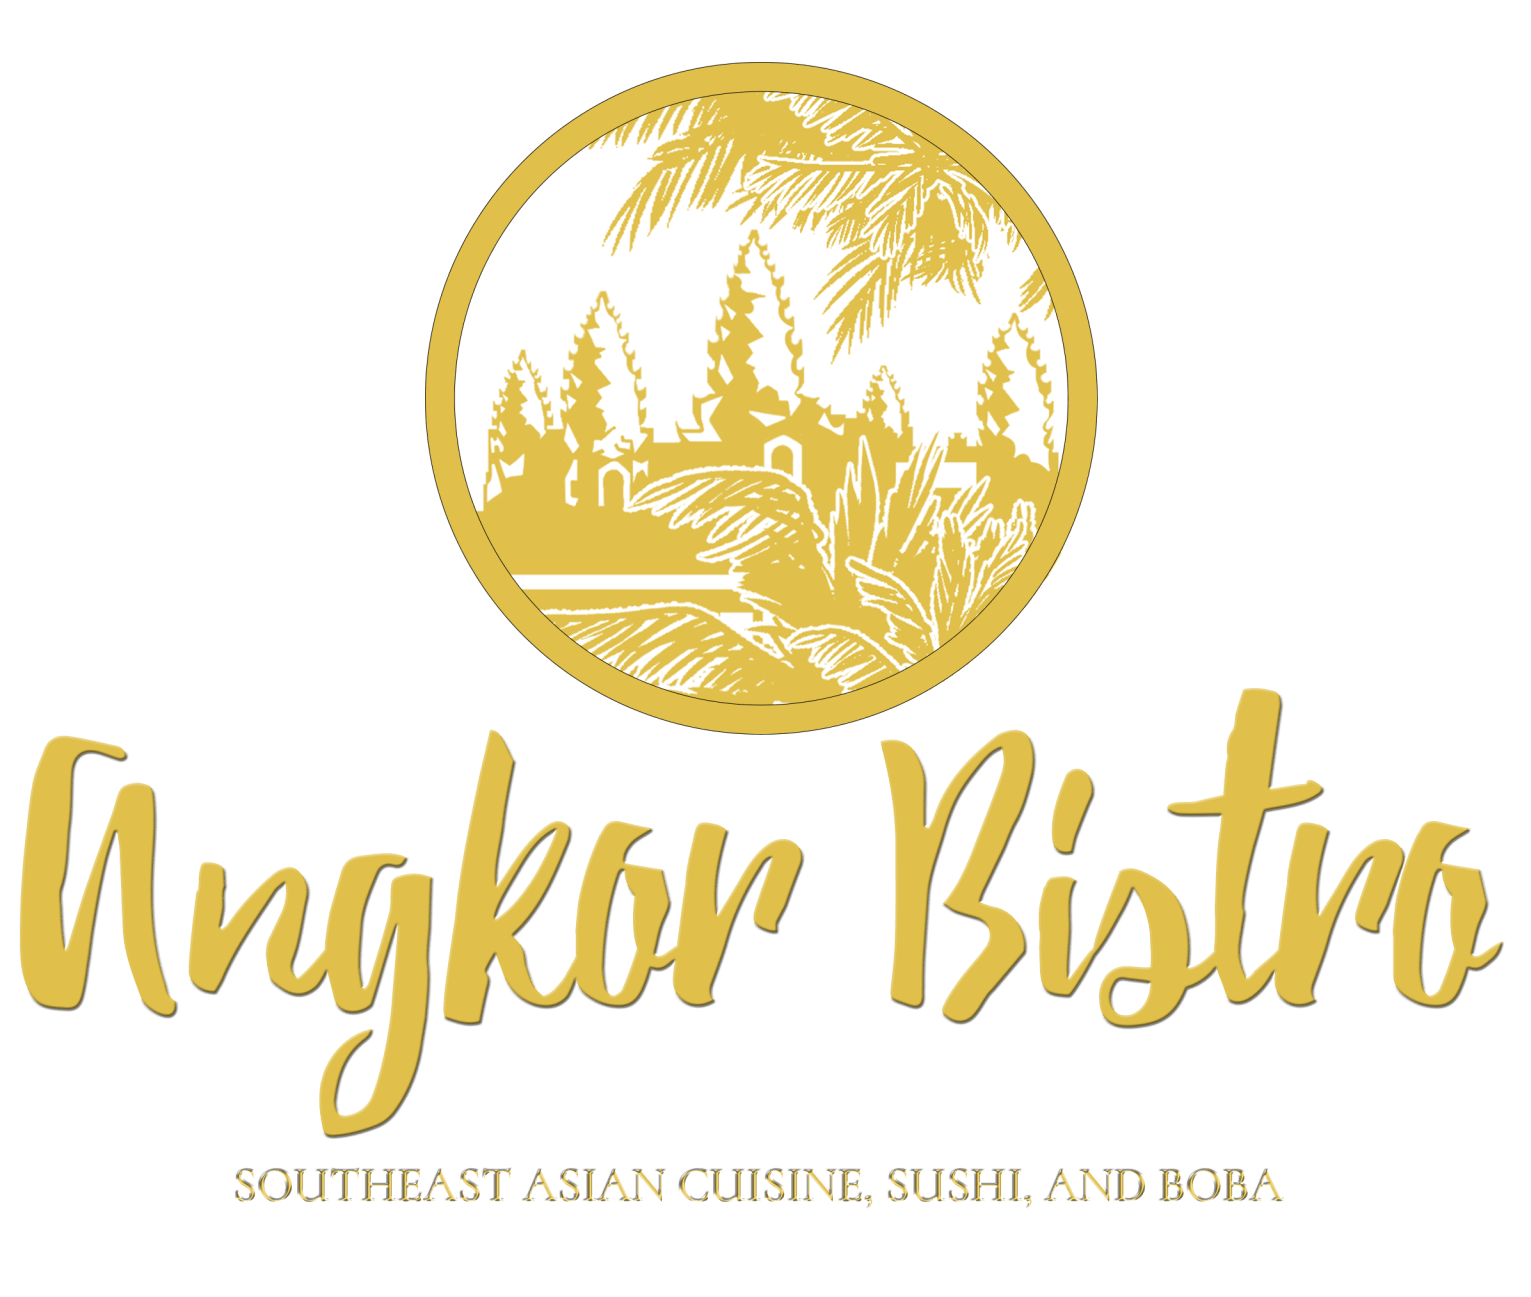 The logo for angkor bistro southeast asian cuisine , sushi and boba.